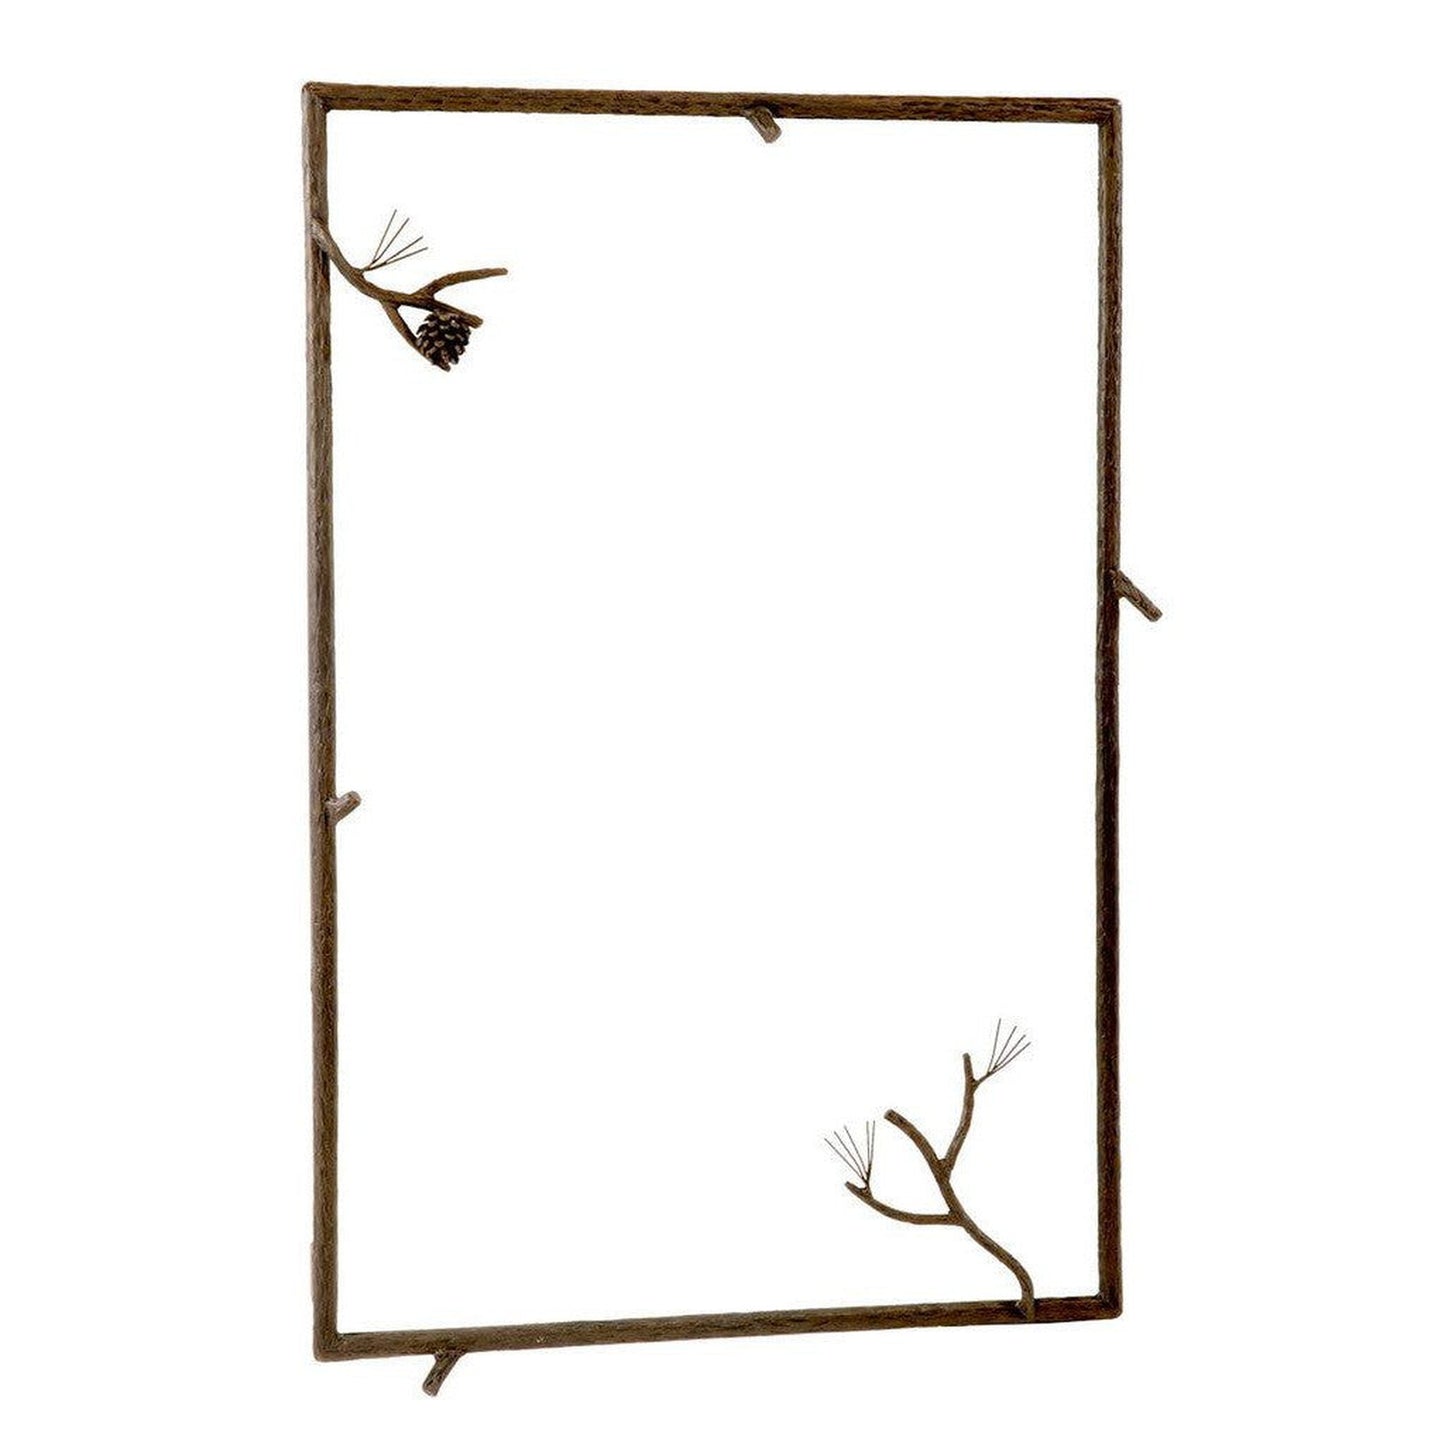 Stone County Ironworks Pine 37" x 25" Large Burnished Gold Iron Wall Mirror With Copper Iron Accent